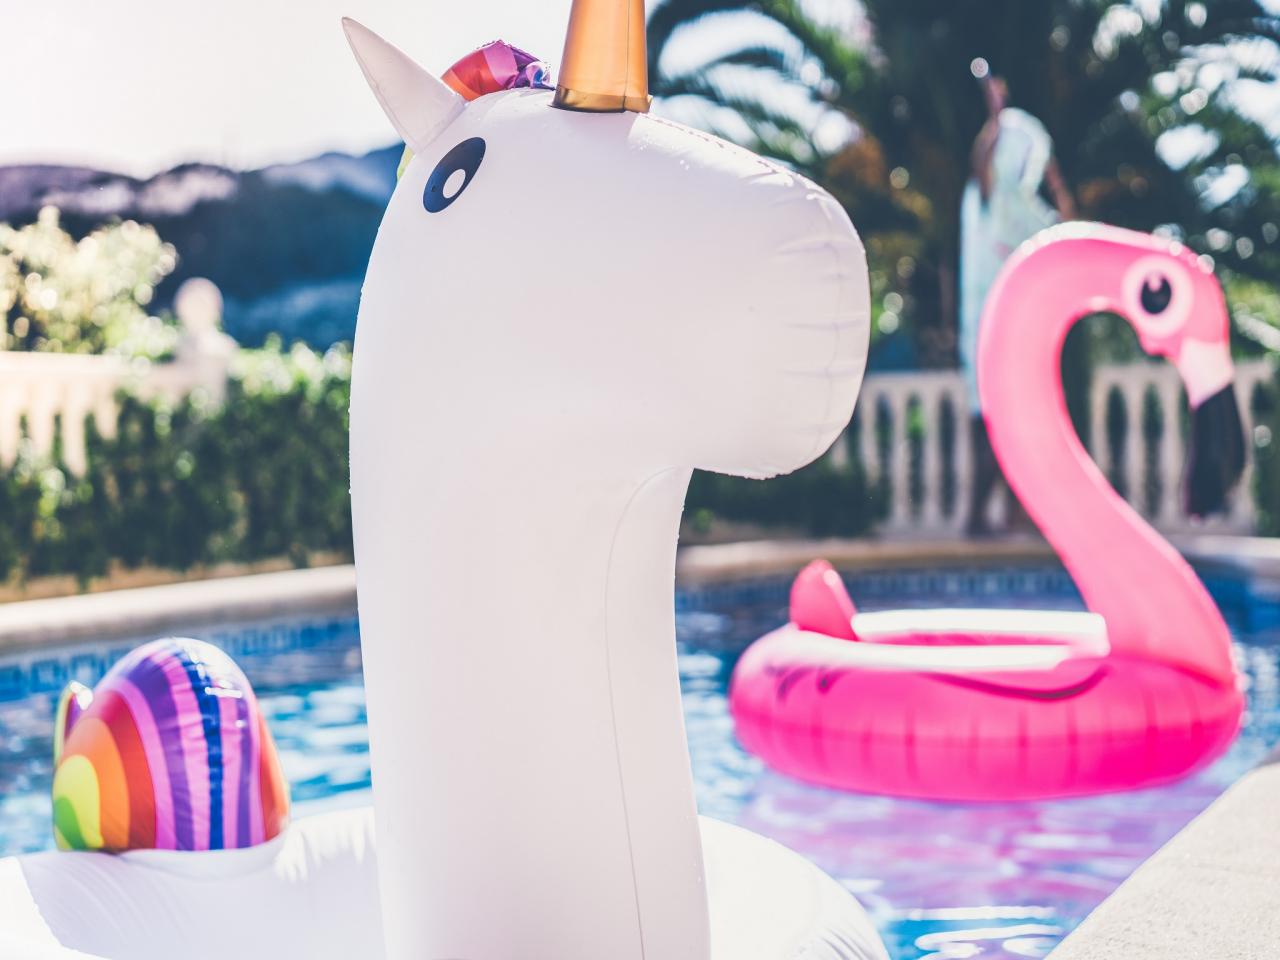 Make a Splash at your Summer Pool Party with the Best Favors